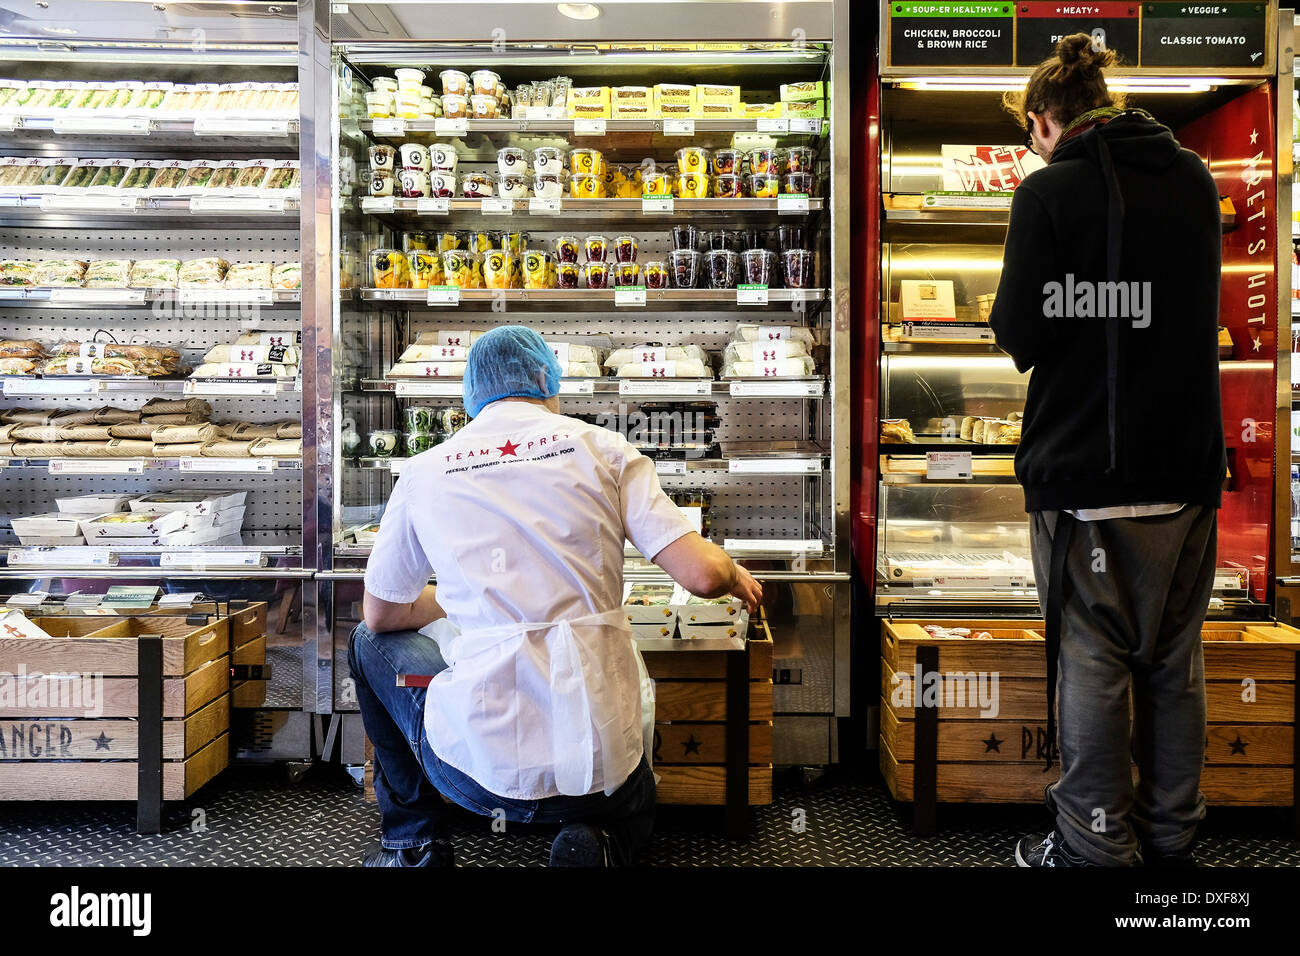 A member of the Pret a Manger staff stocking shelves. Stock Photo